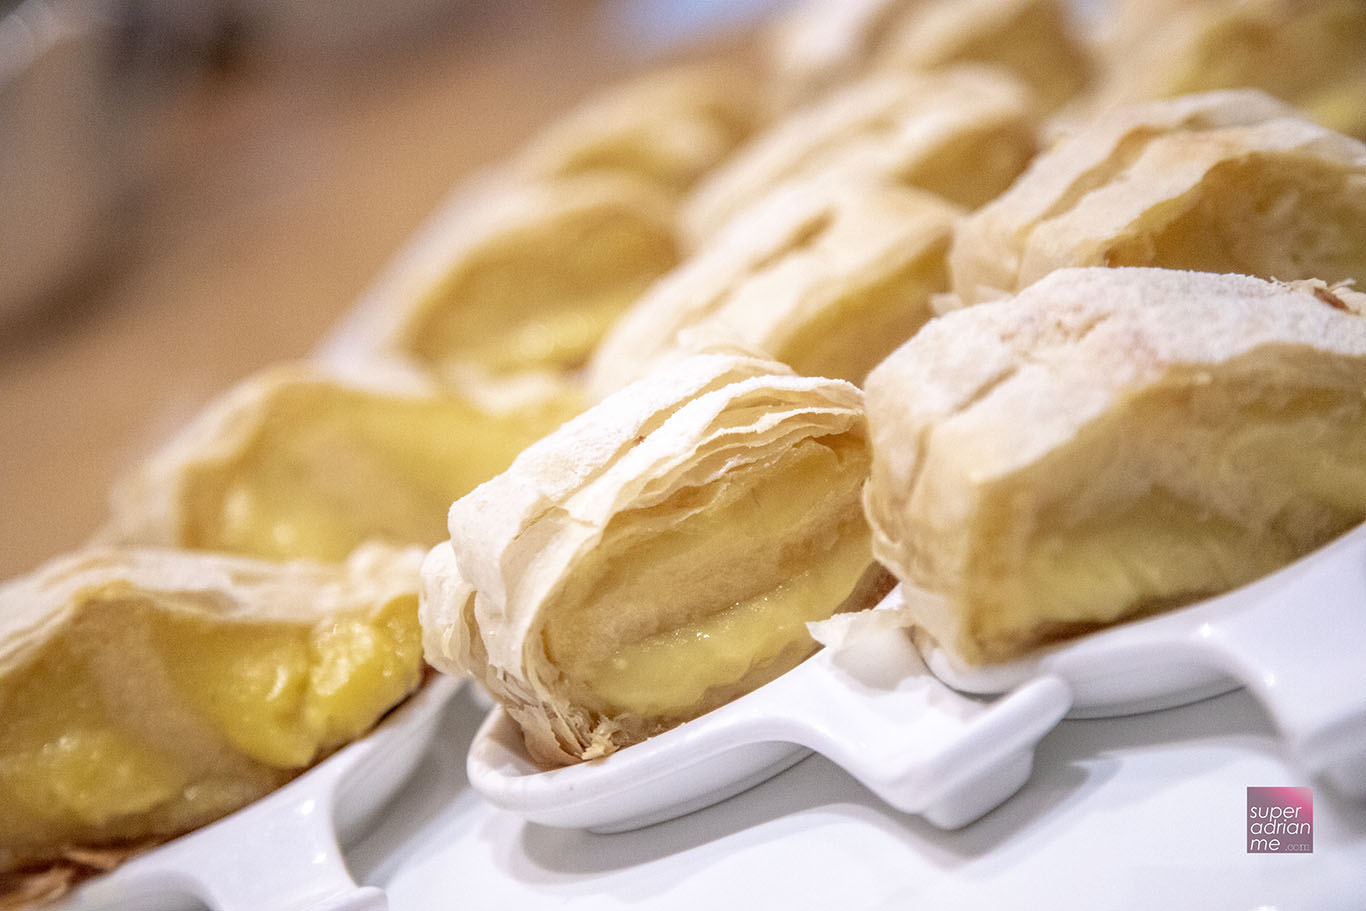 Durian Strudel at Marriott Cafe in Singapore